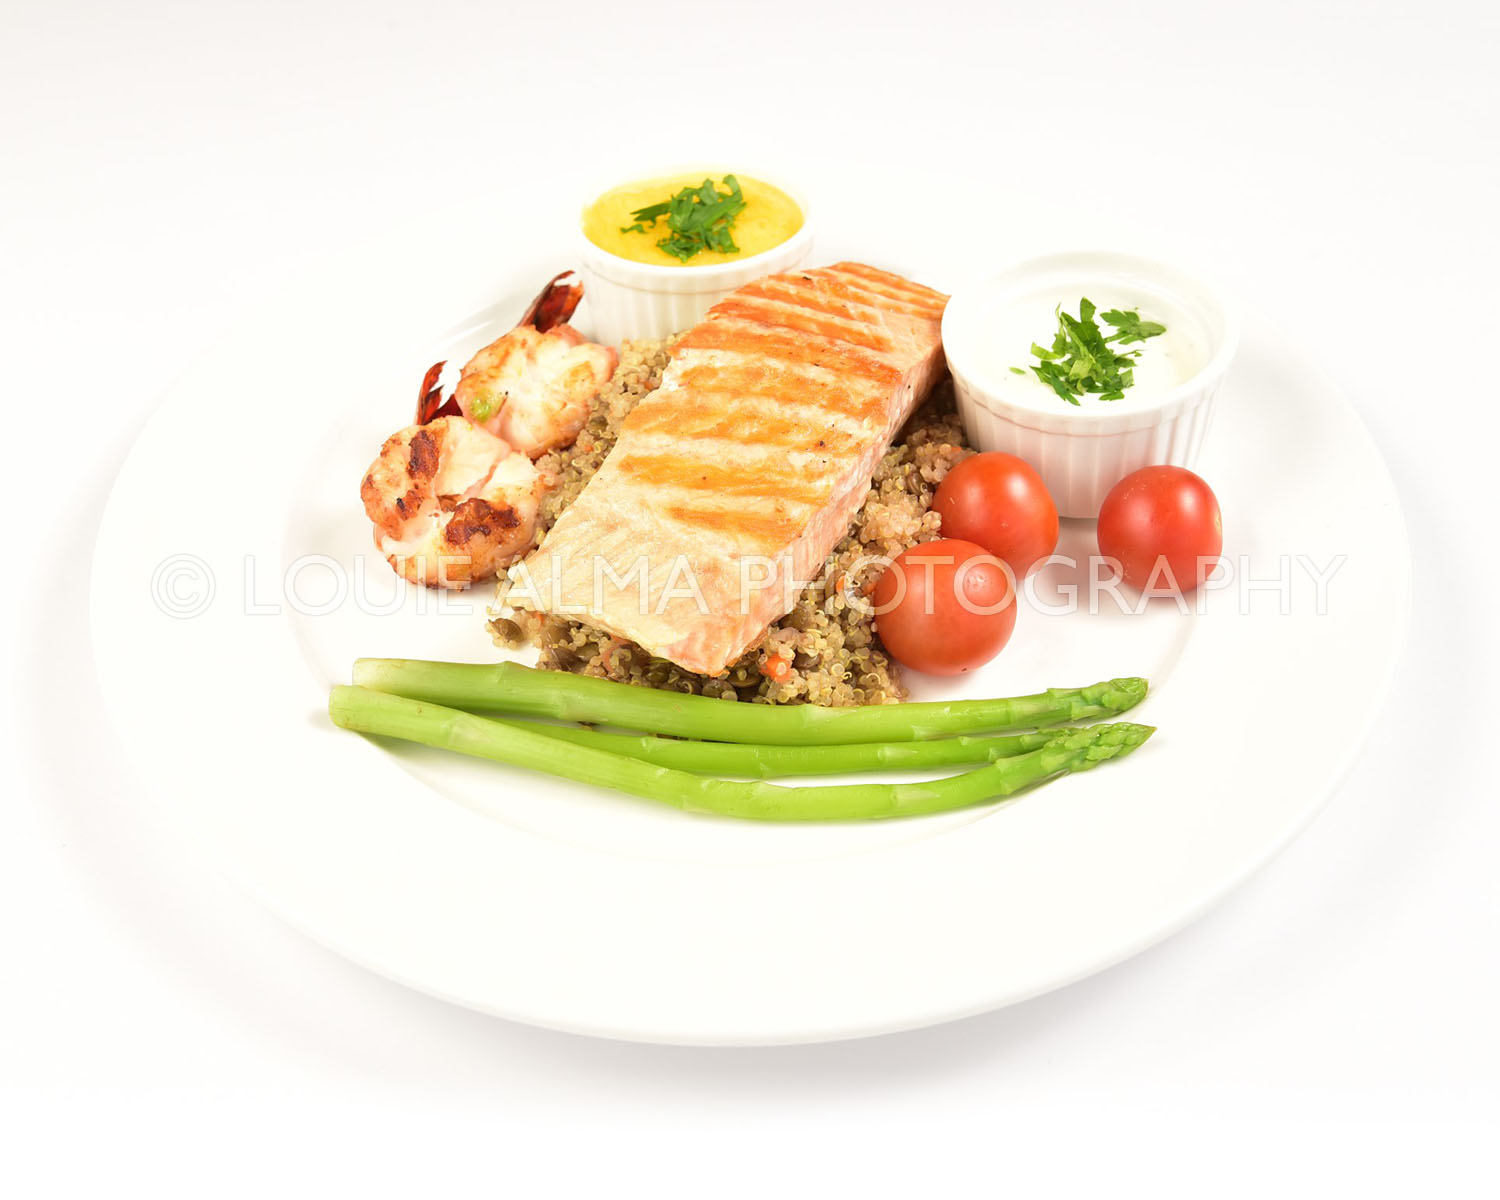 LouieAlmaPhotography_Food_Protein&Carb_SeafoodDeMare